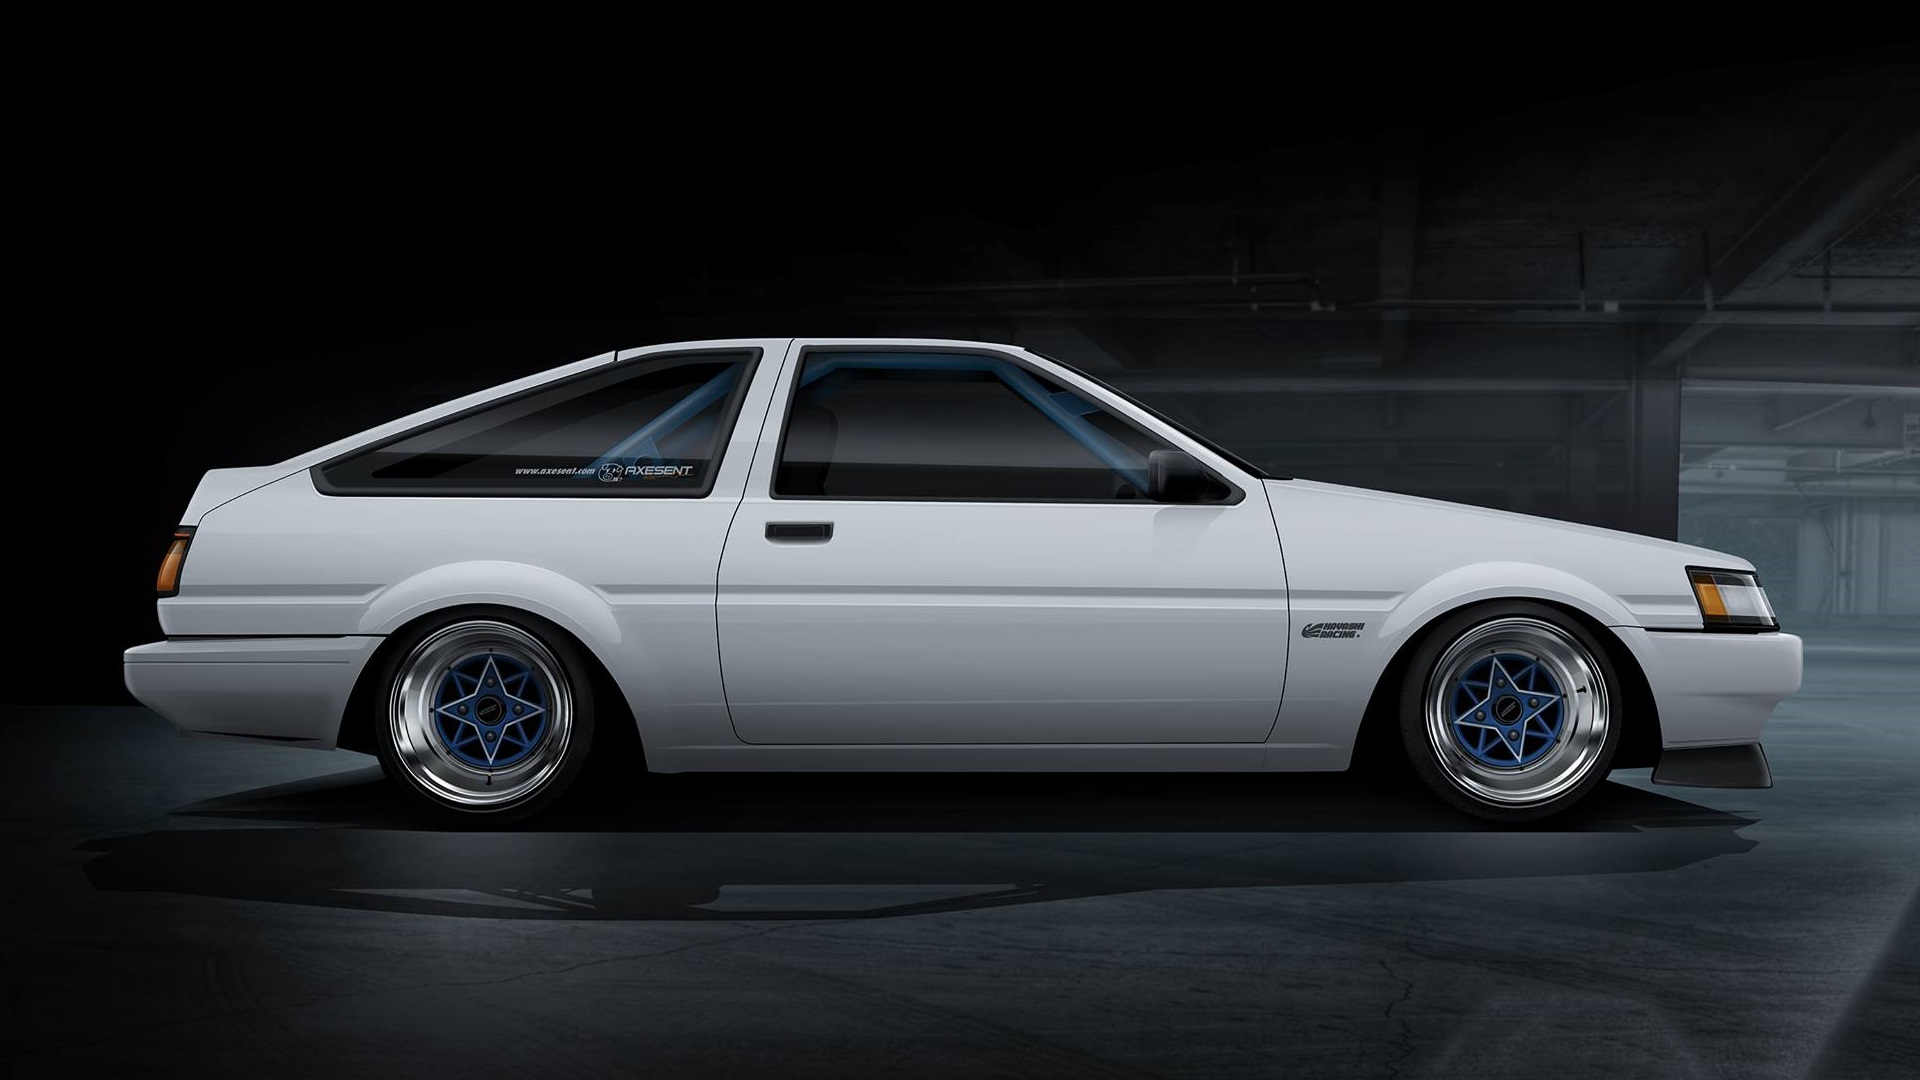 General 1920x1080 Axesent Creations Toyota AE86 CGI Toyota Japanese cars side view white cars